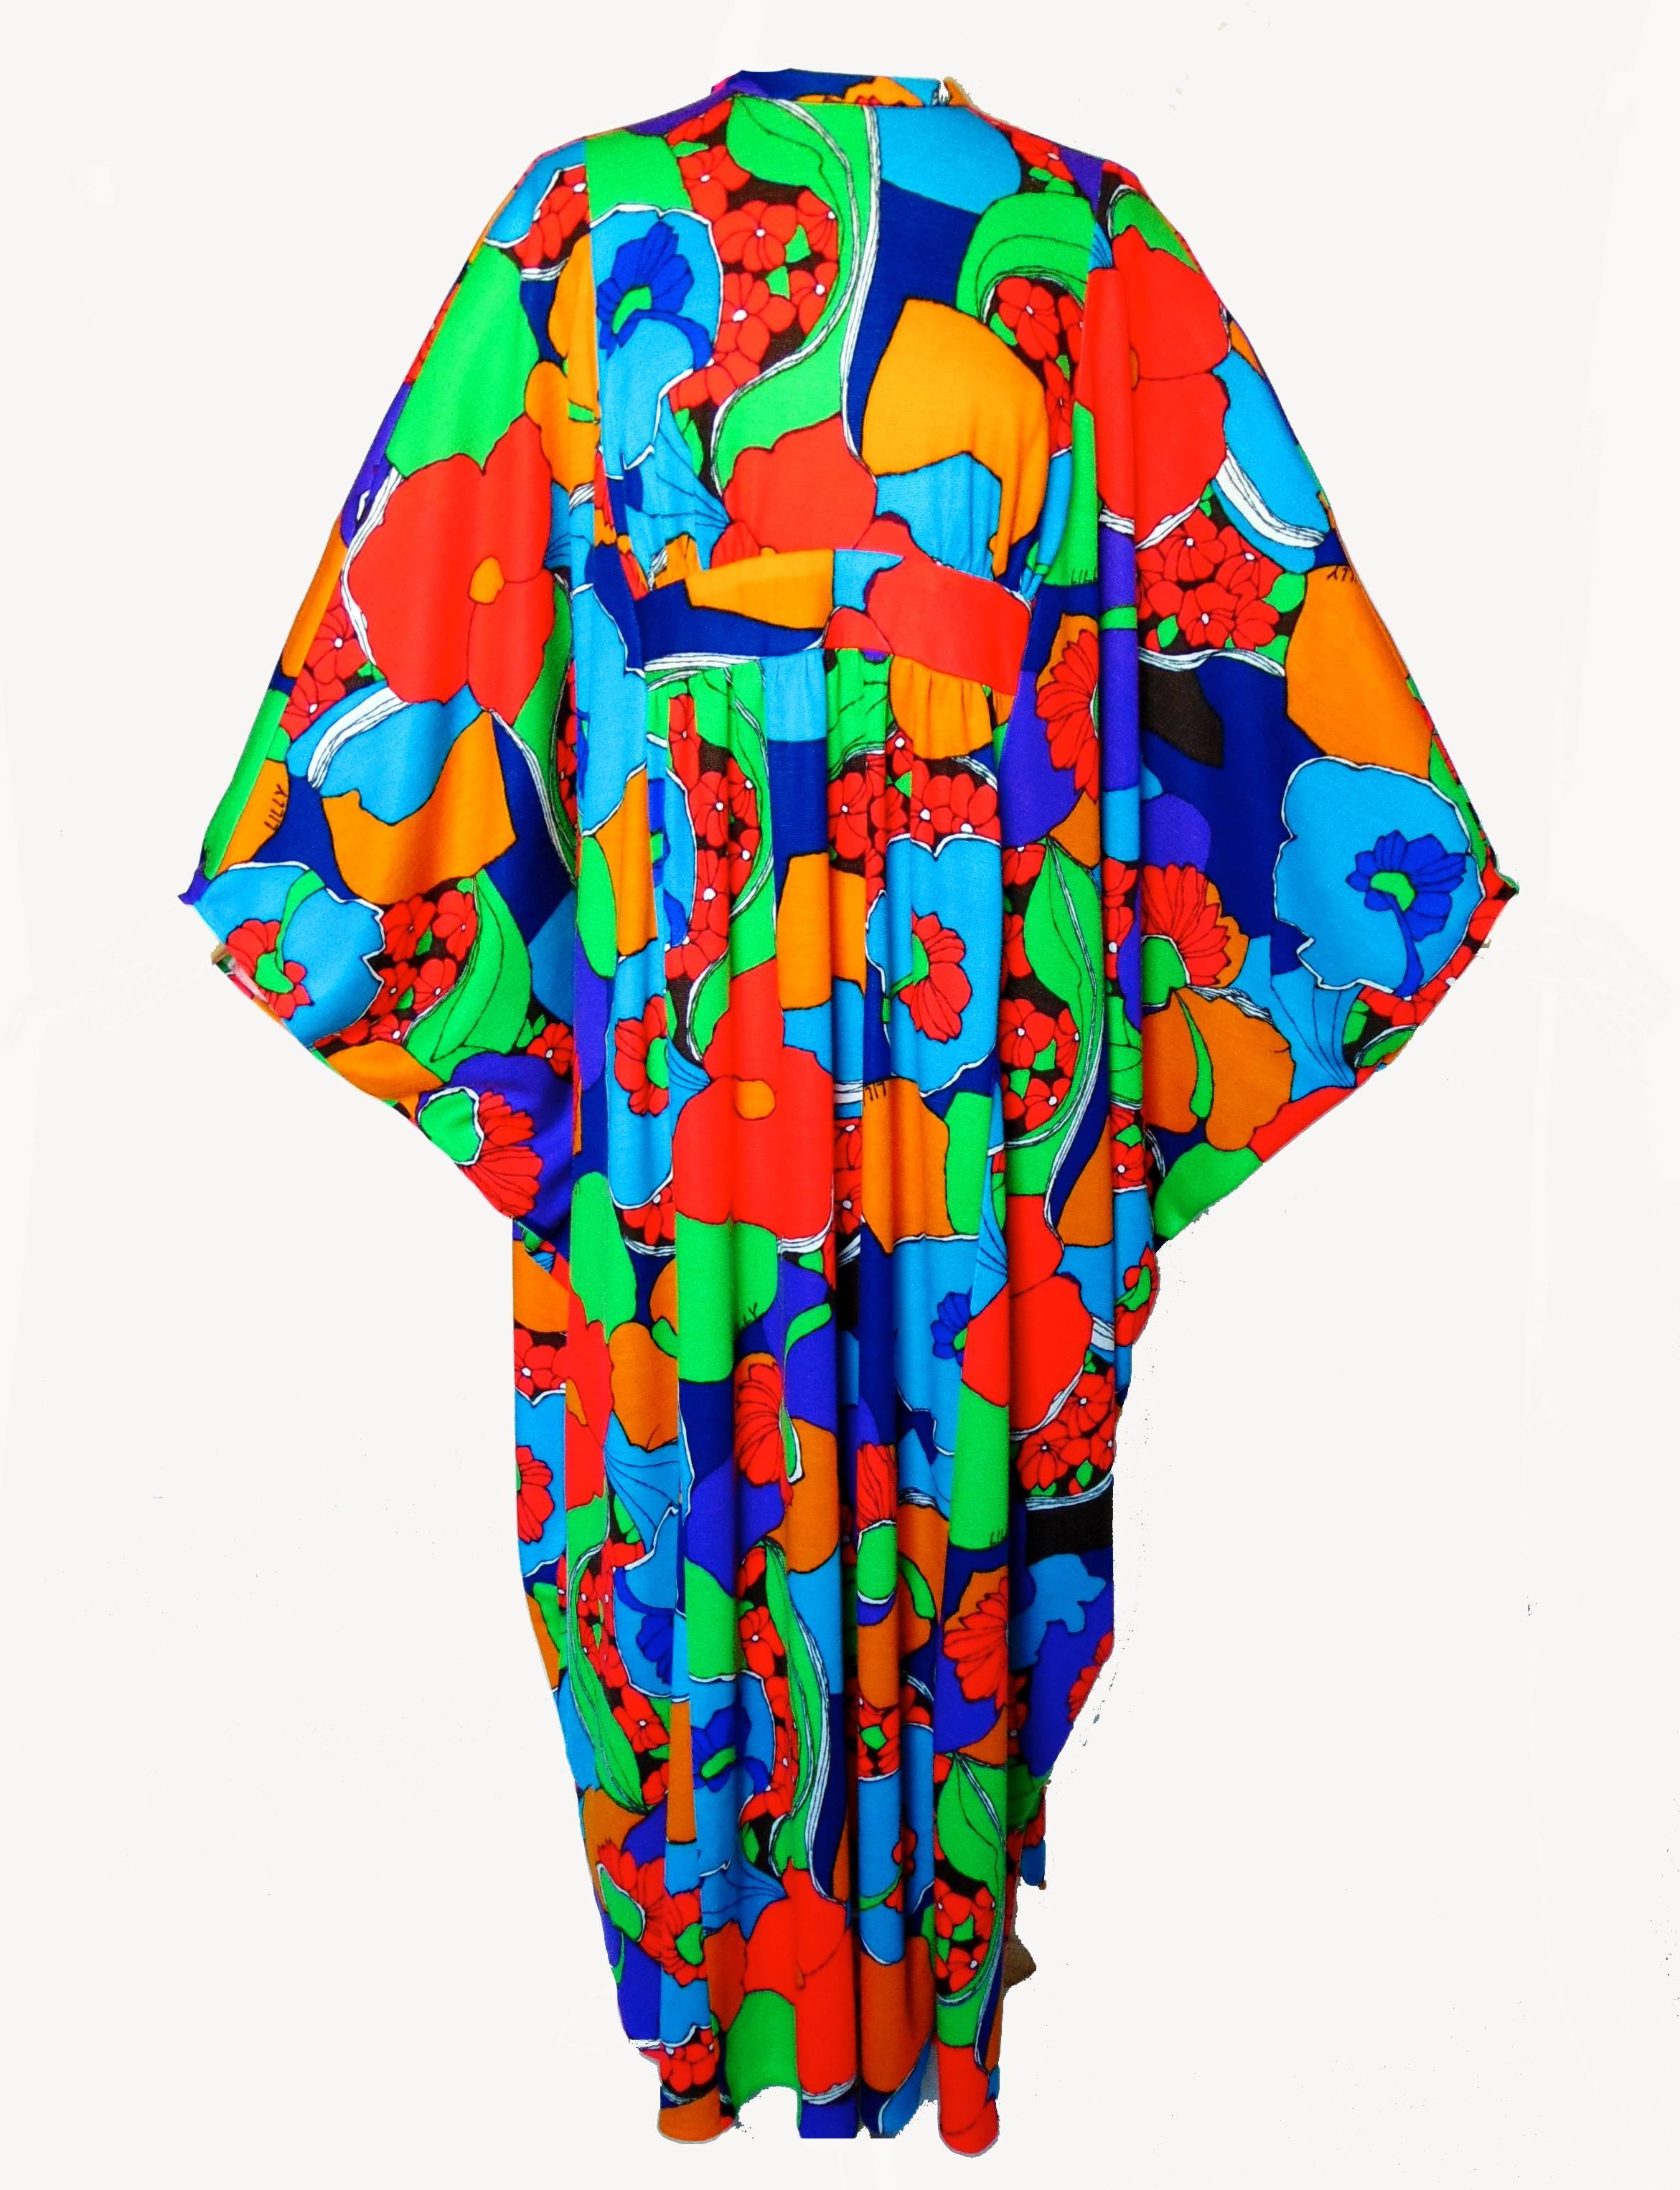 Lilly Pulitzer Kaftan Dress Vibrant Graphic Floral Print One Size Fits Most 70s 2